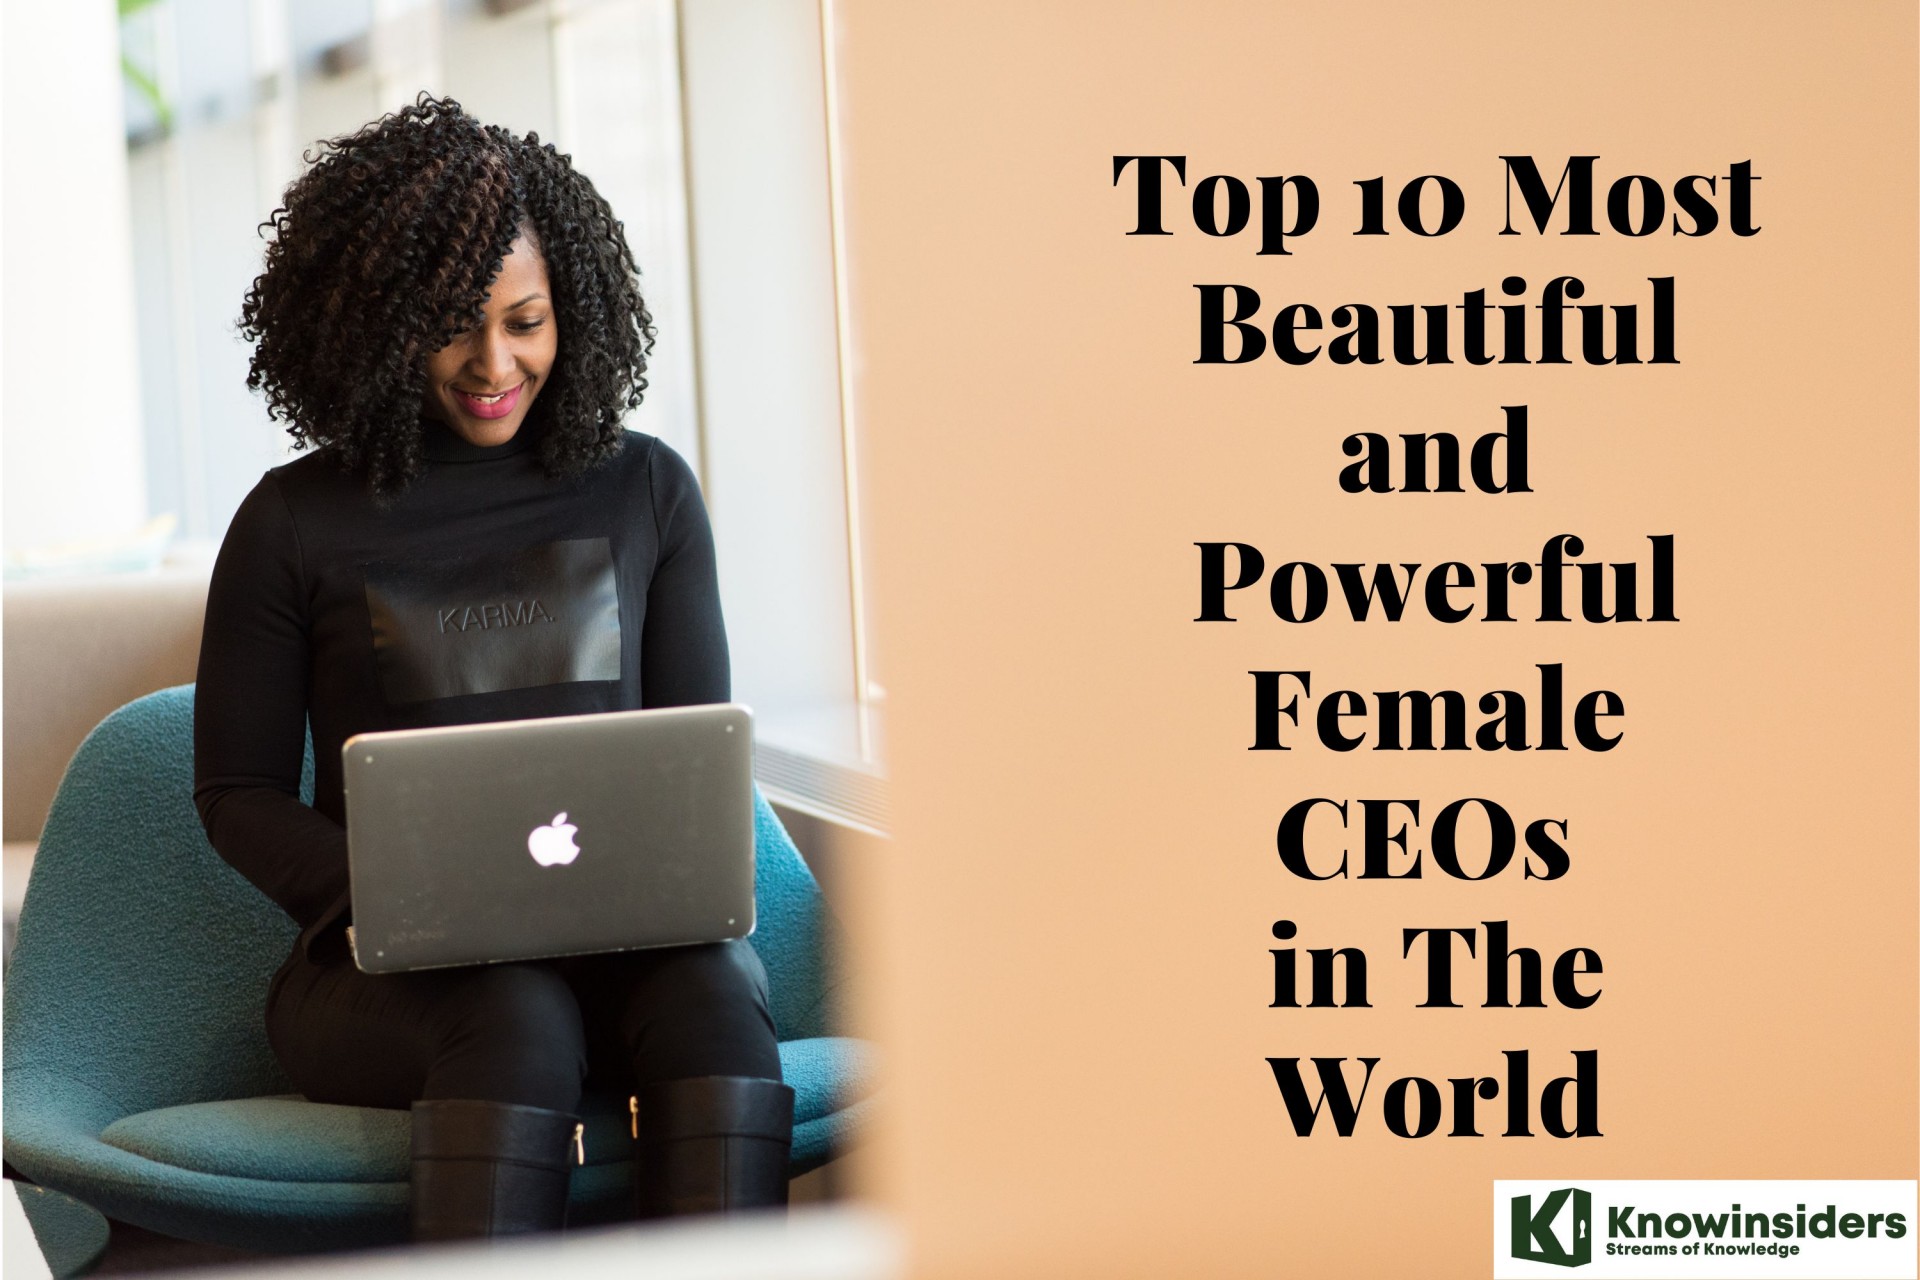 Top 10 Most Beautiful and Powerful Female CEOs in The World